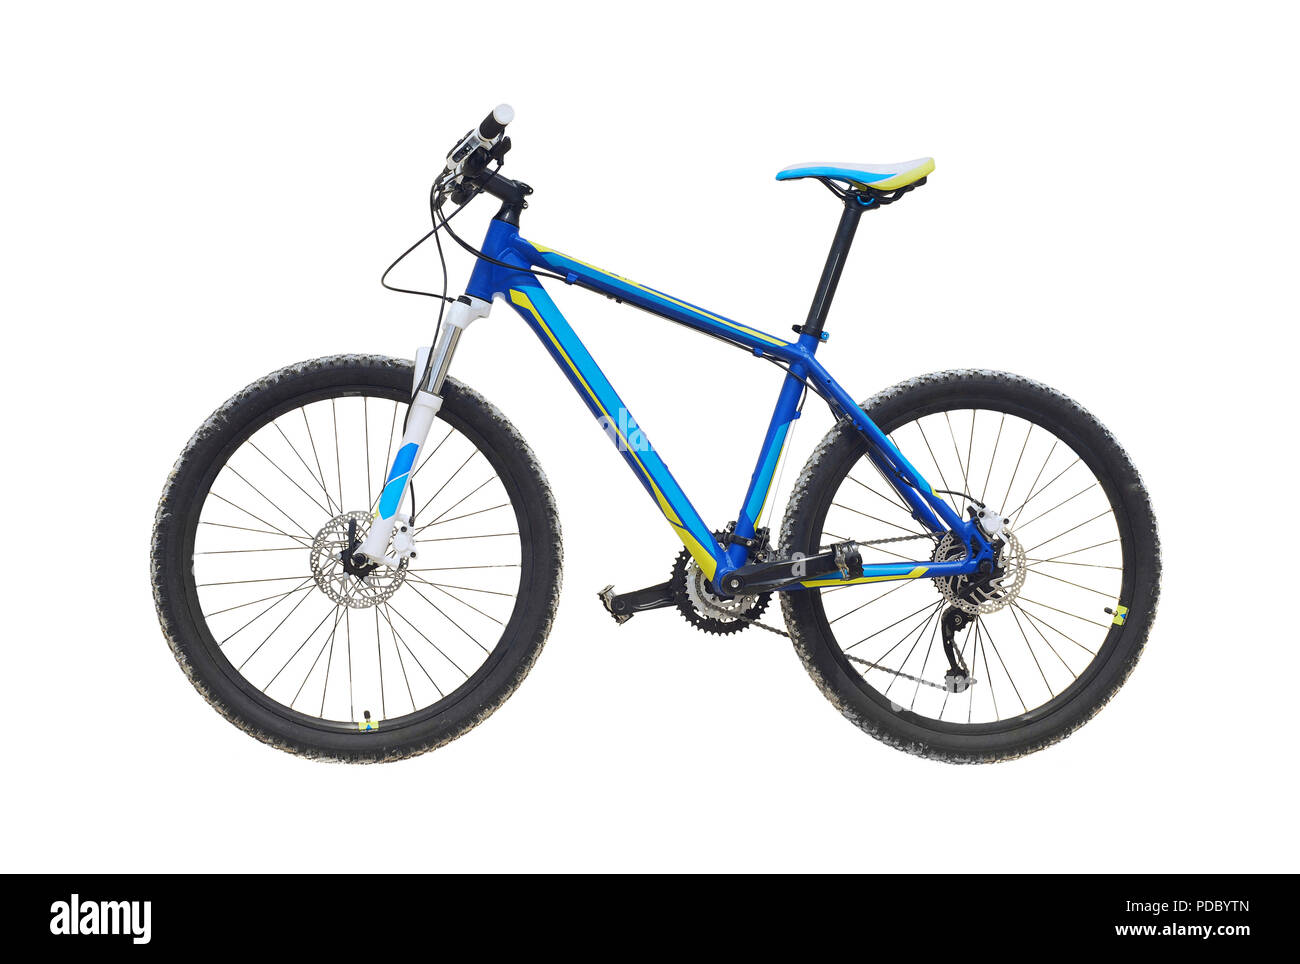 Blue mountain bike isolated on white Banque D'Images